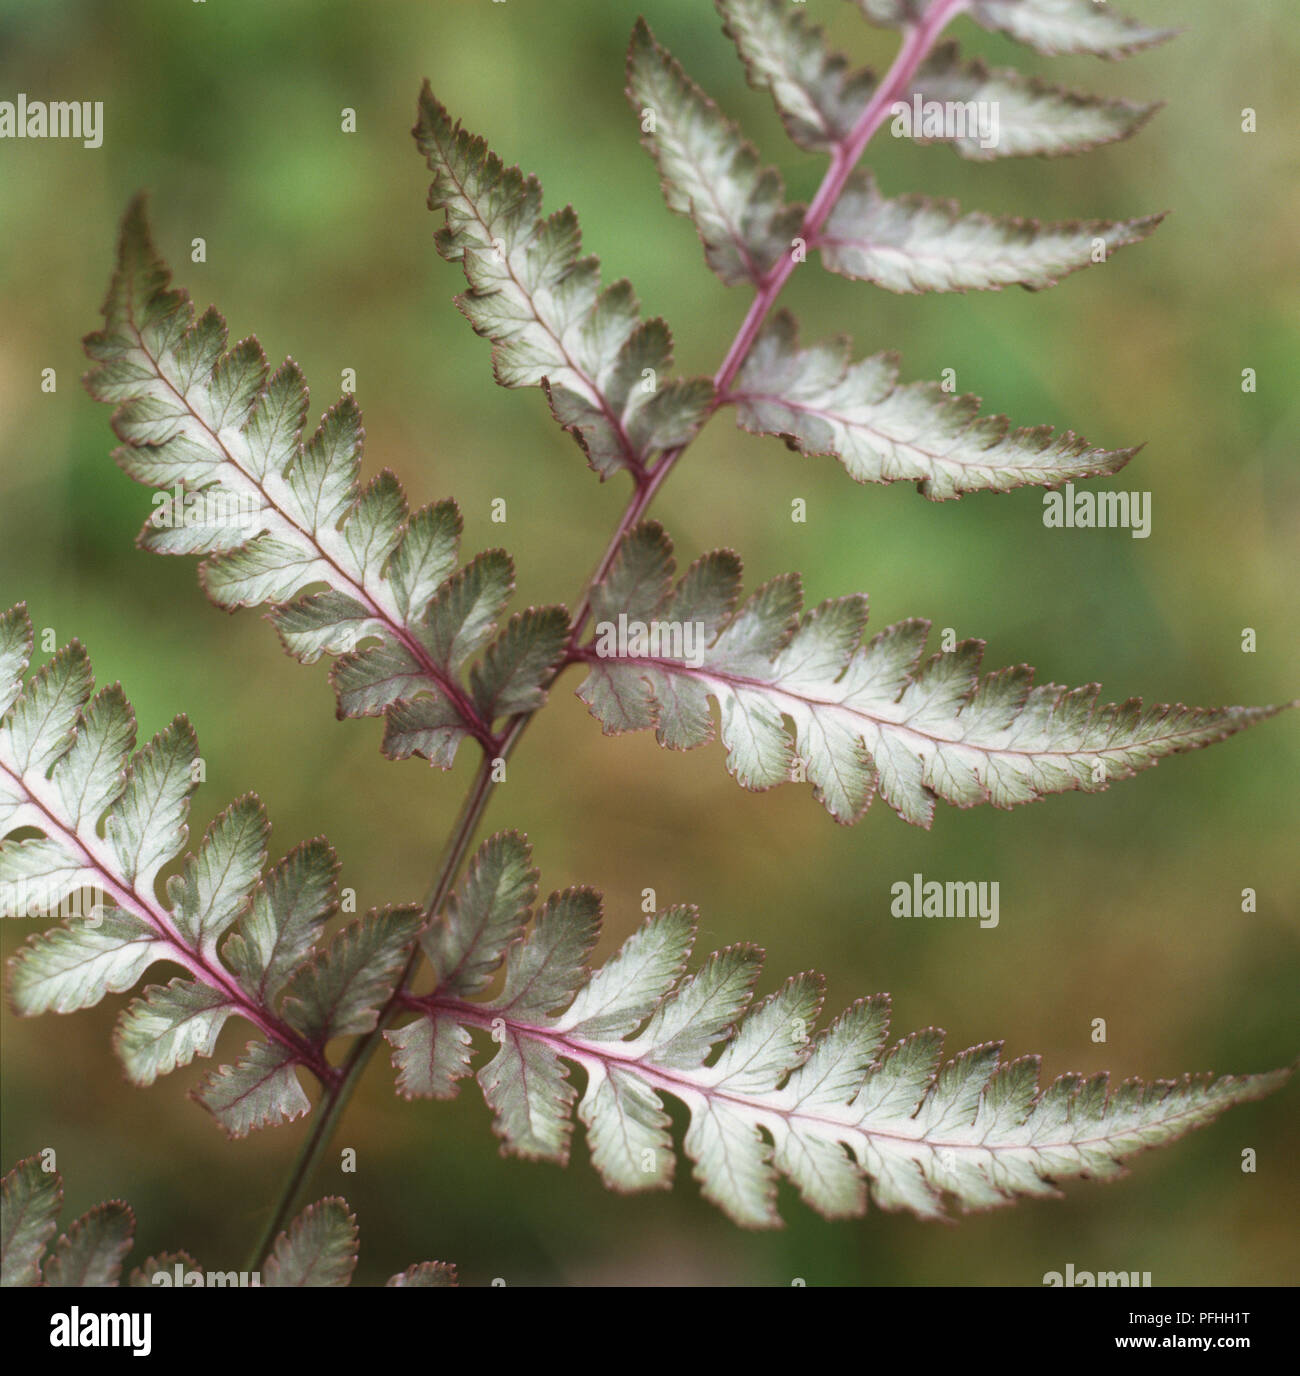 Athyrium niponicum var. pictum, silvery grey pink purple and green coloured delicate leaves. Stock Photo